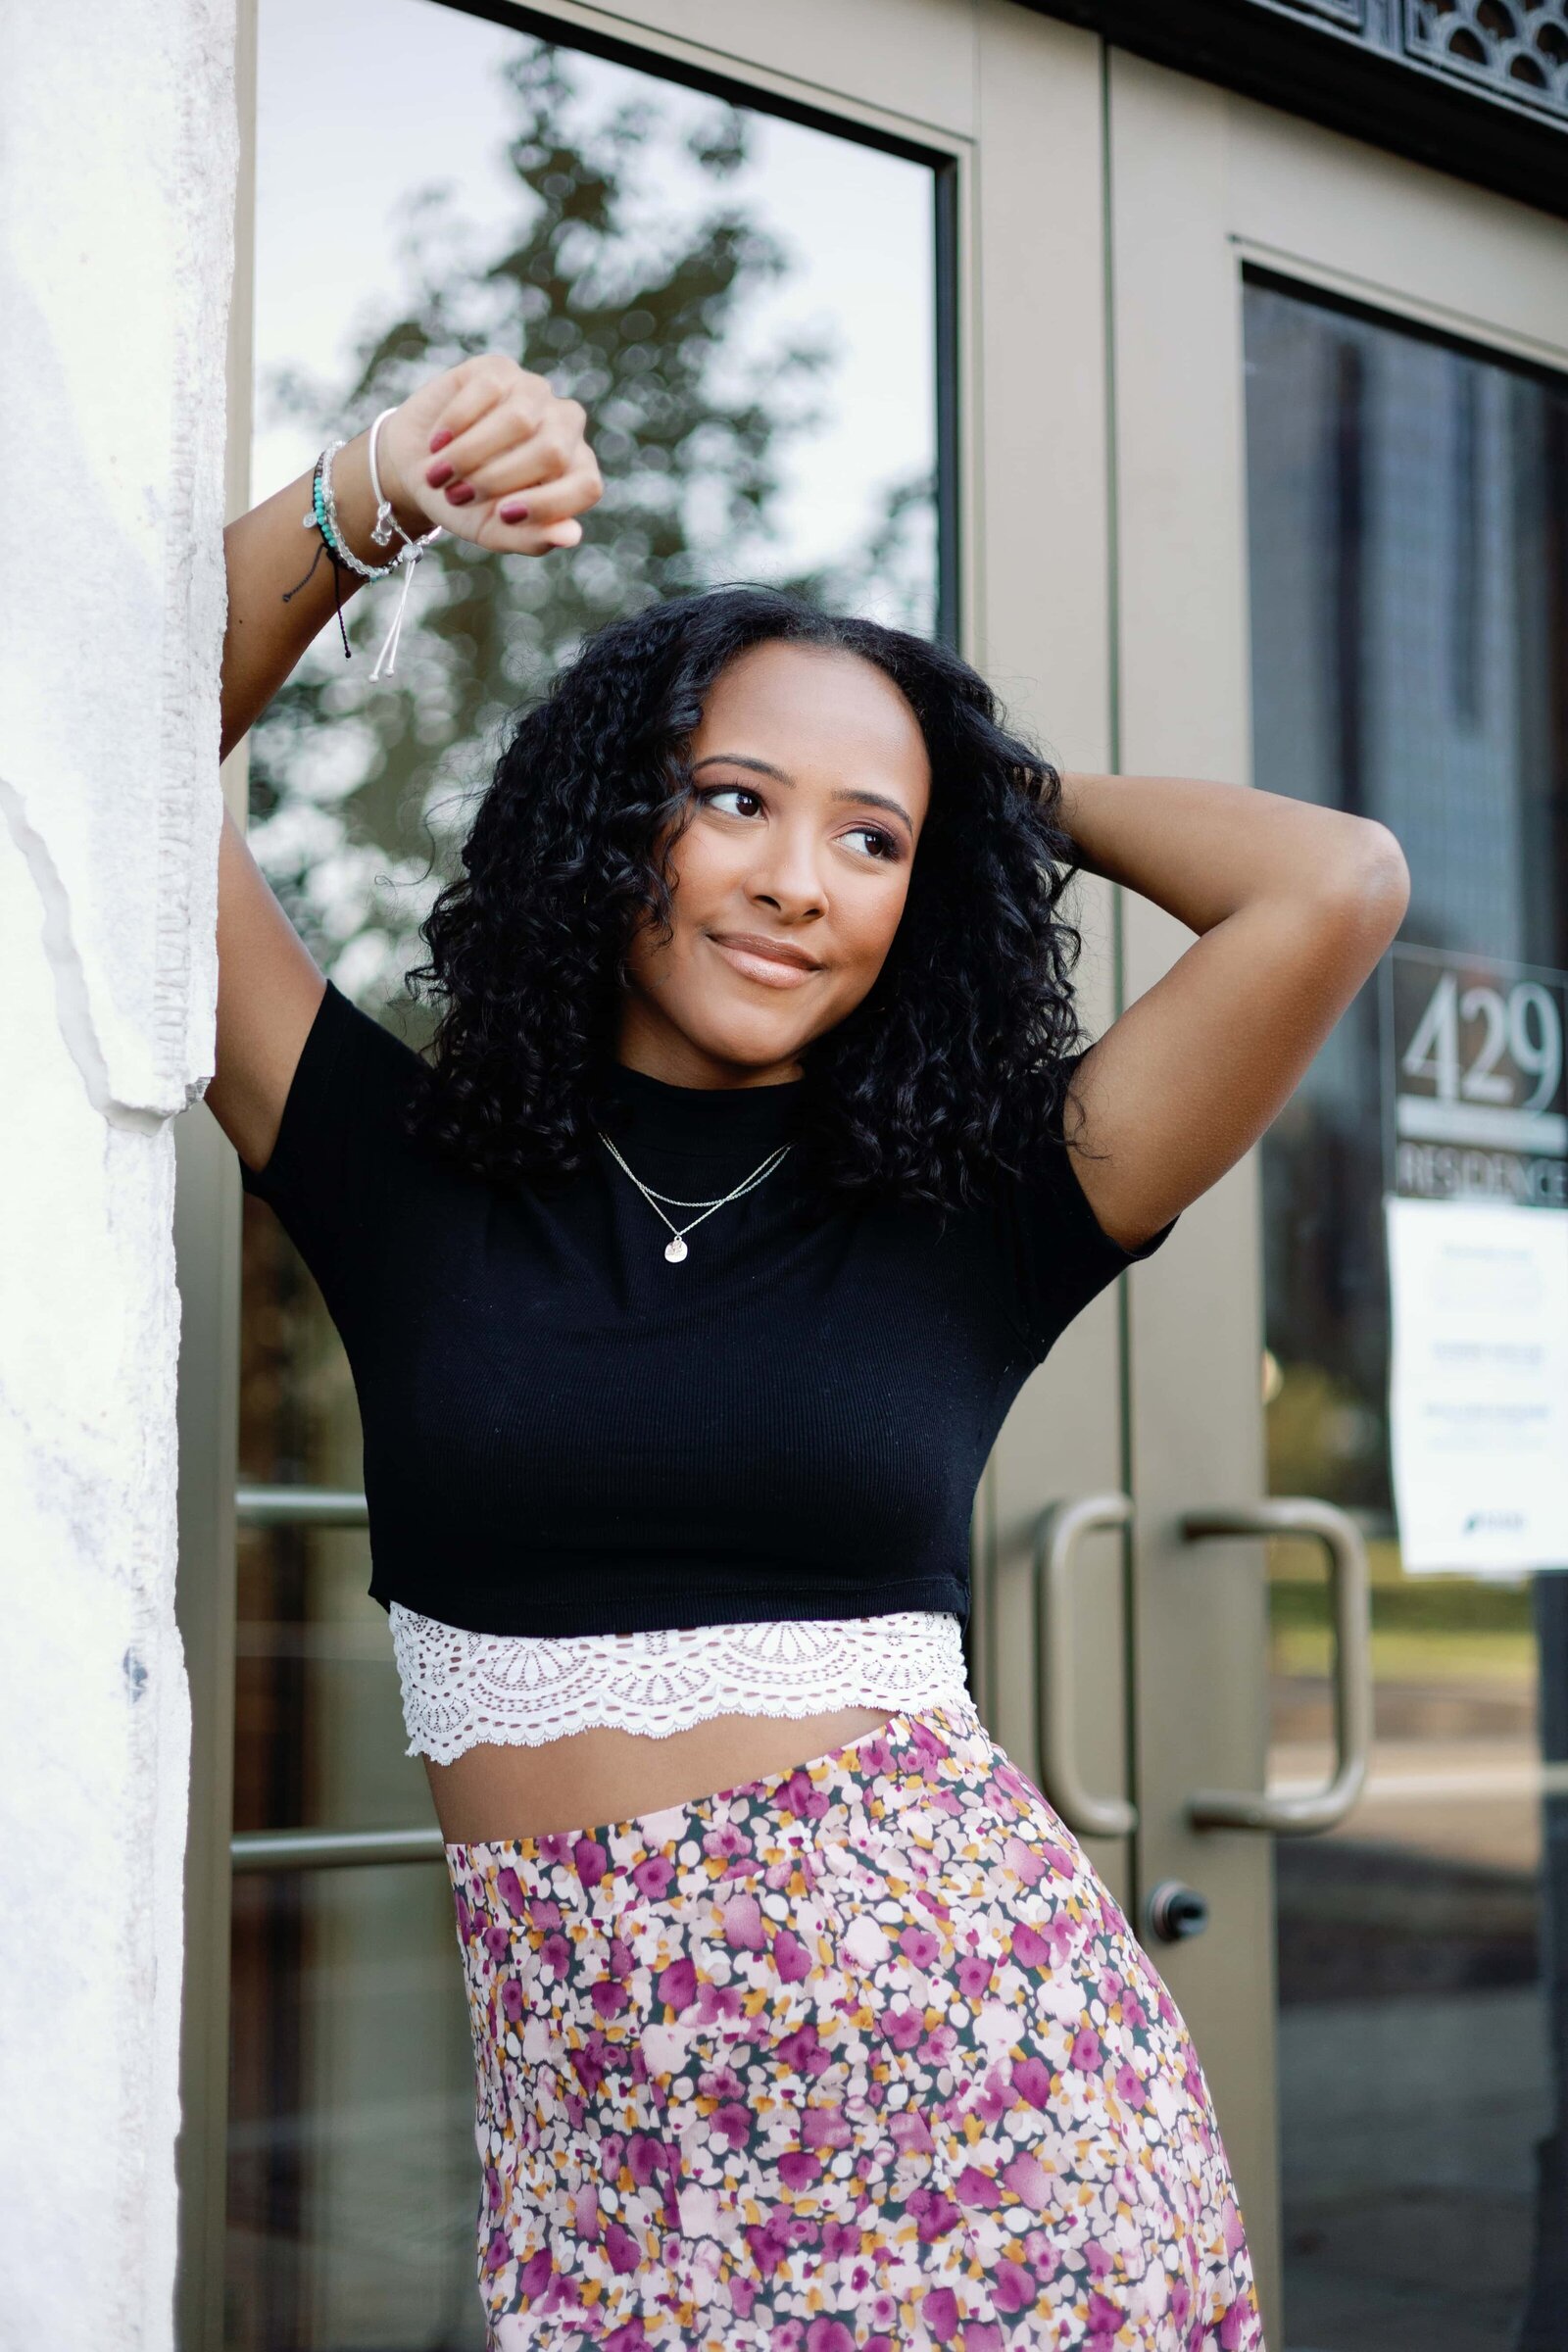 Urban lifestyle senior photo of girl with black top and floral skirt